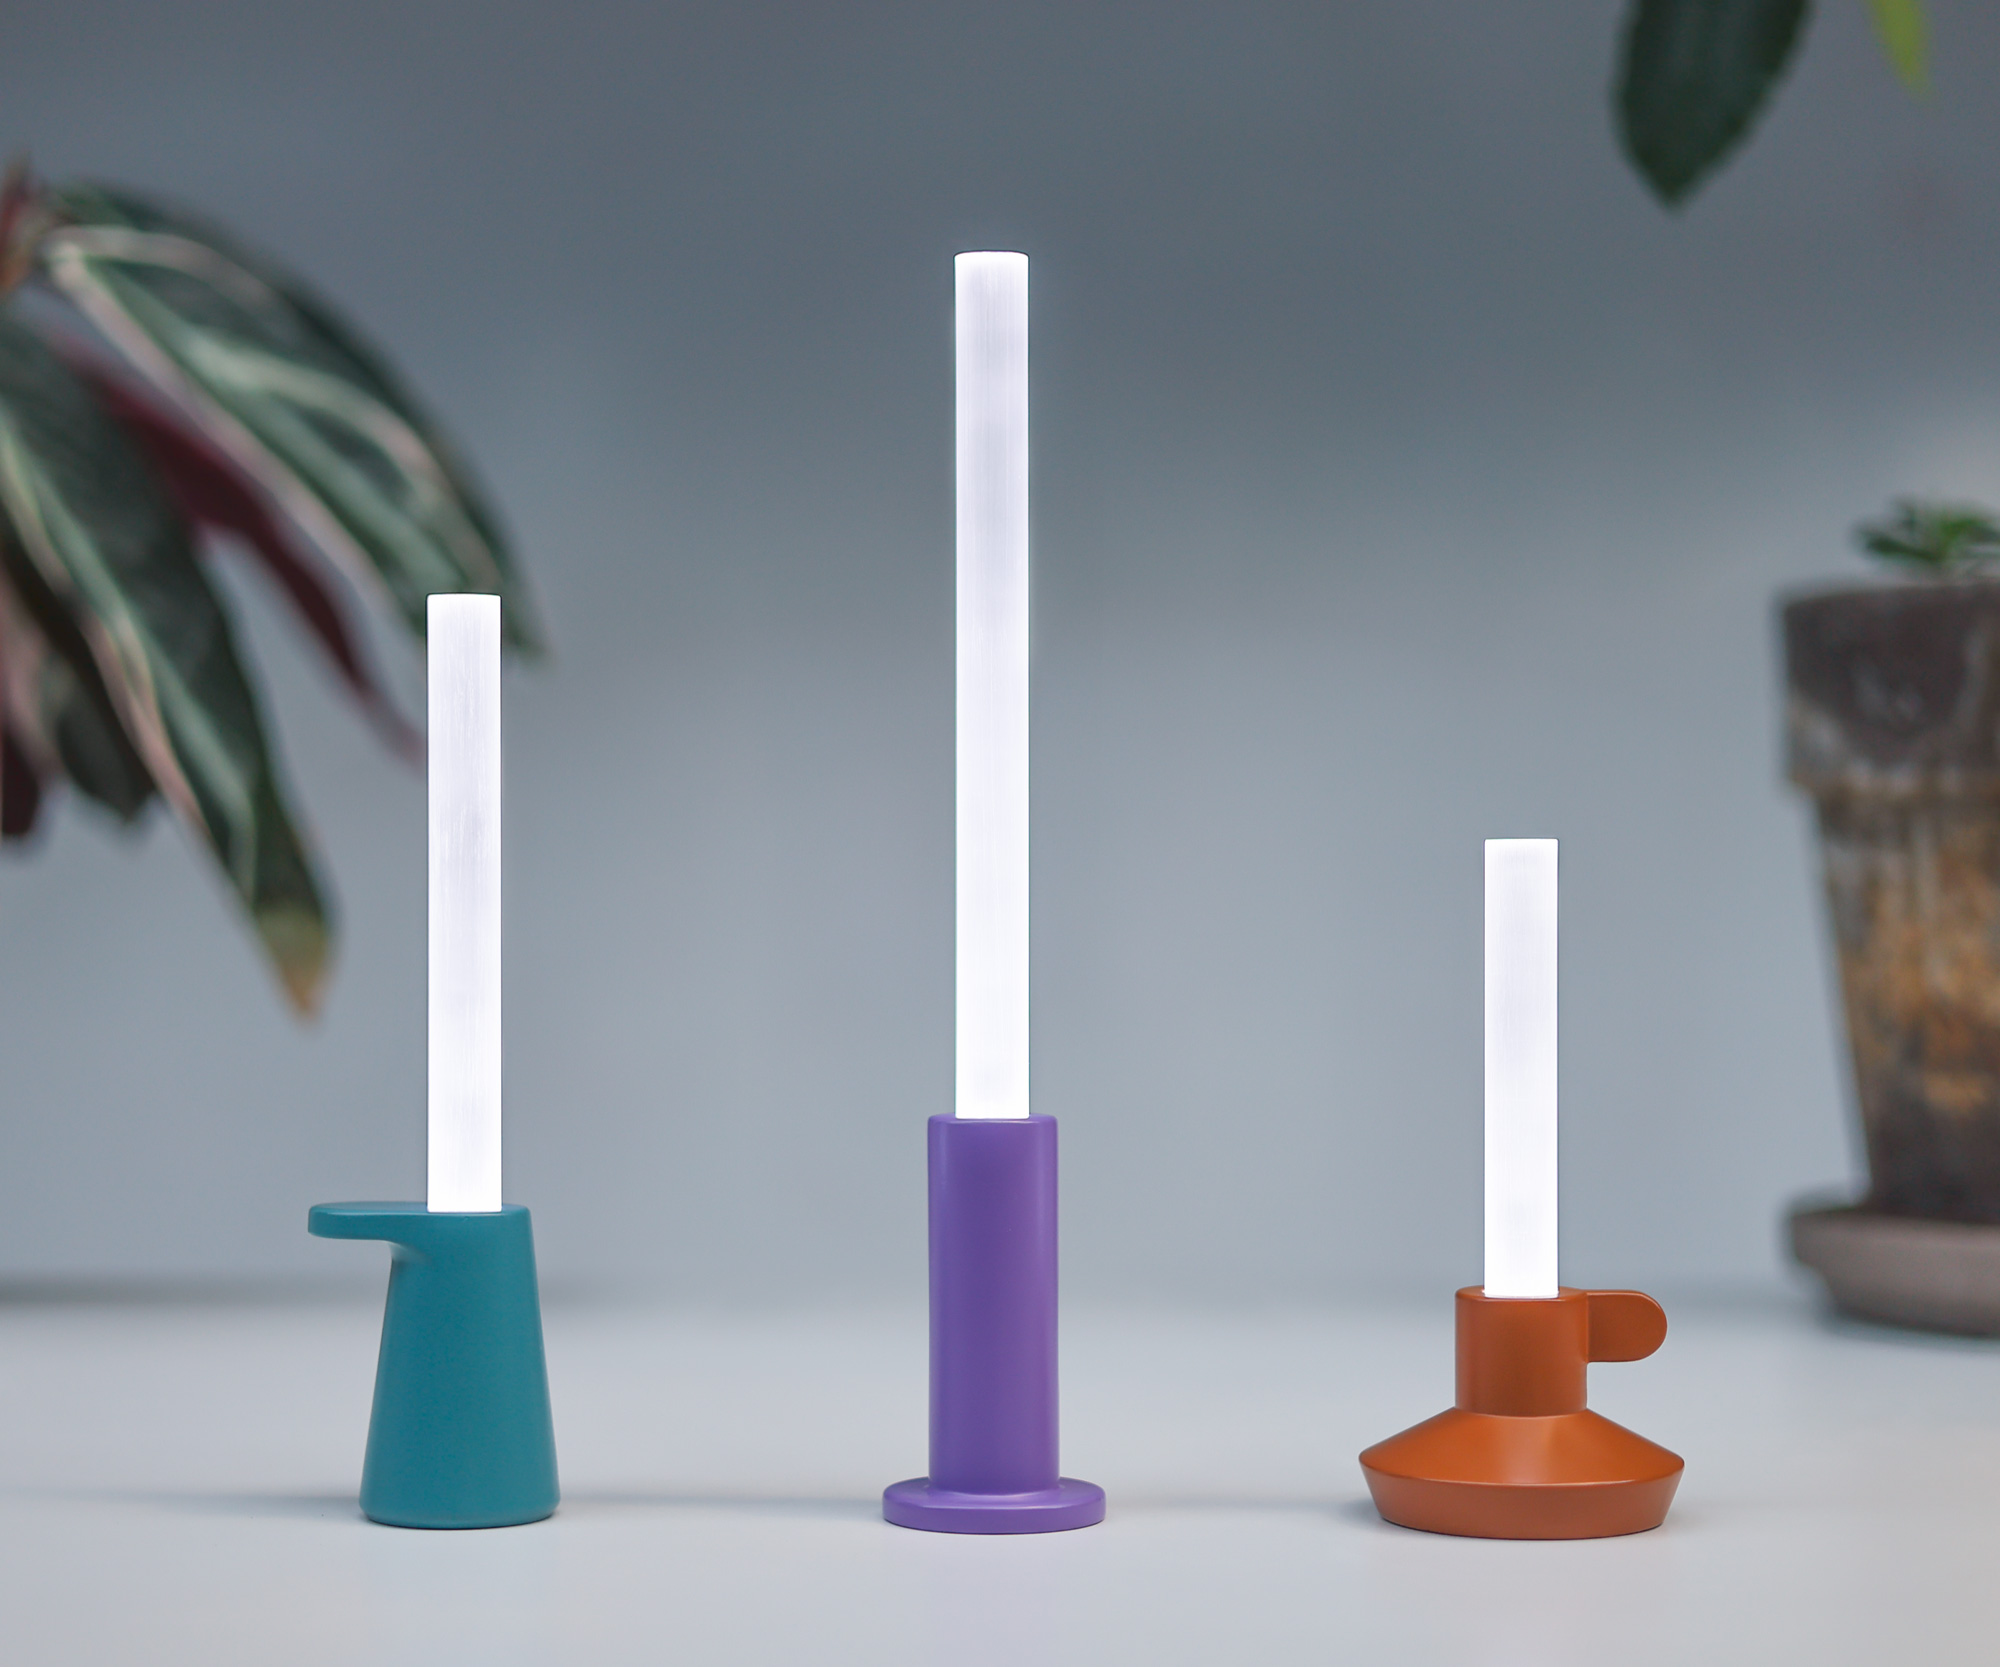 Photograph of the three digital candles on a white background.